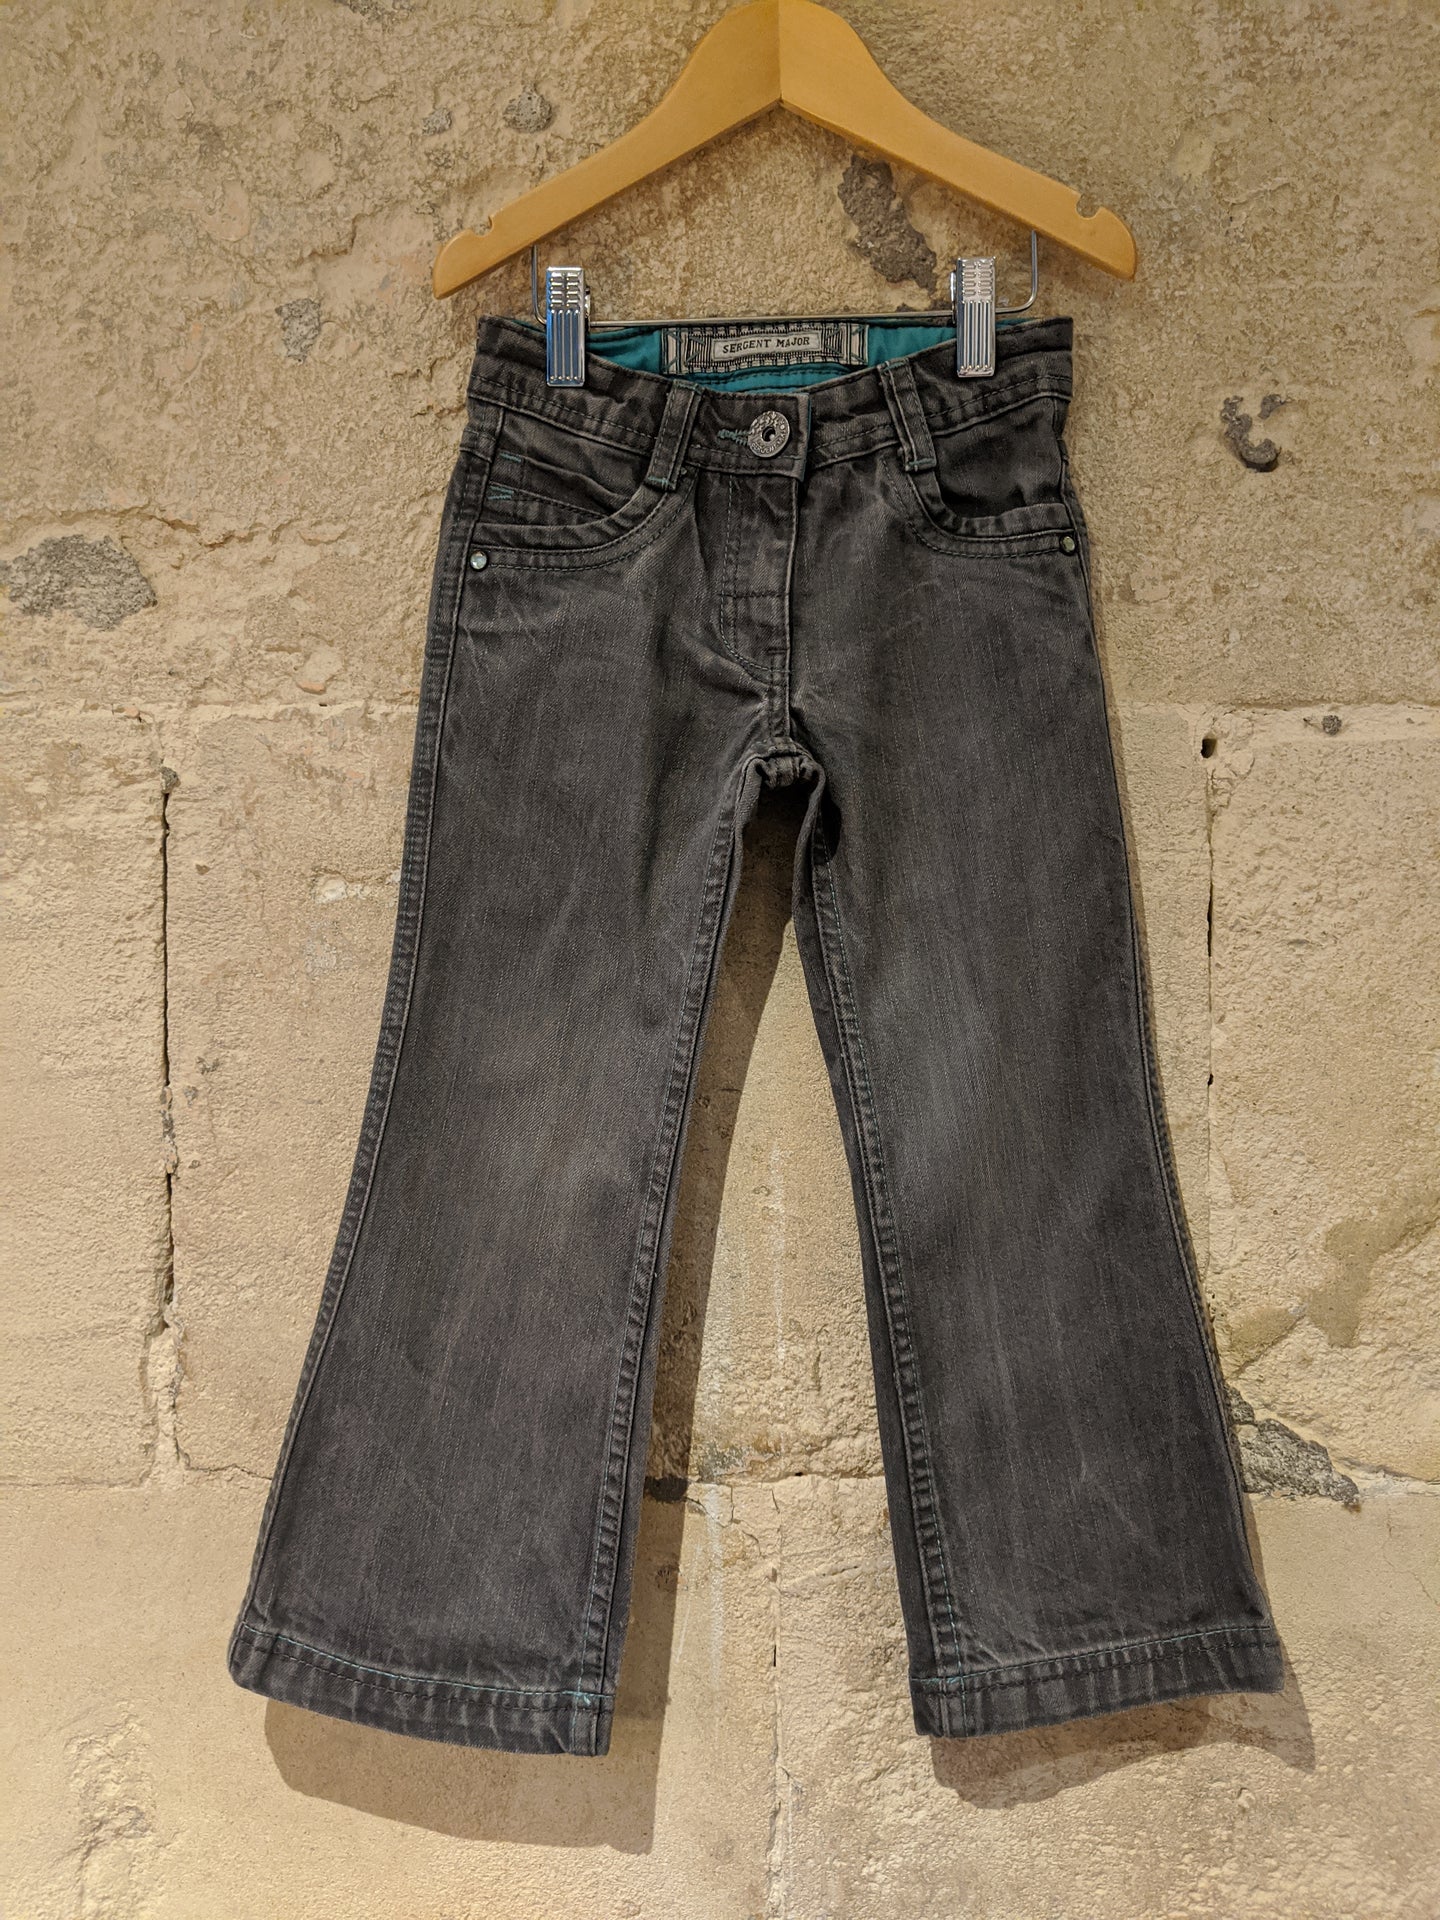 Sergent Major Faded Grey Jeans with Jewels - 4 Years